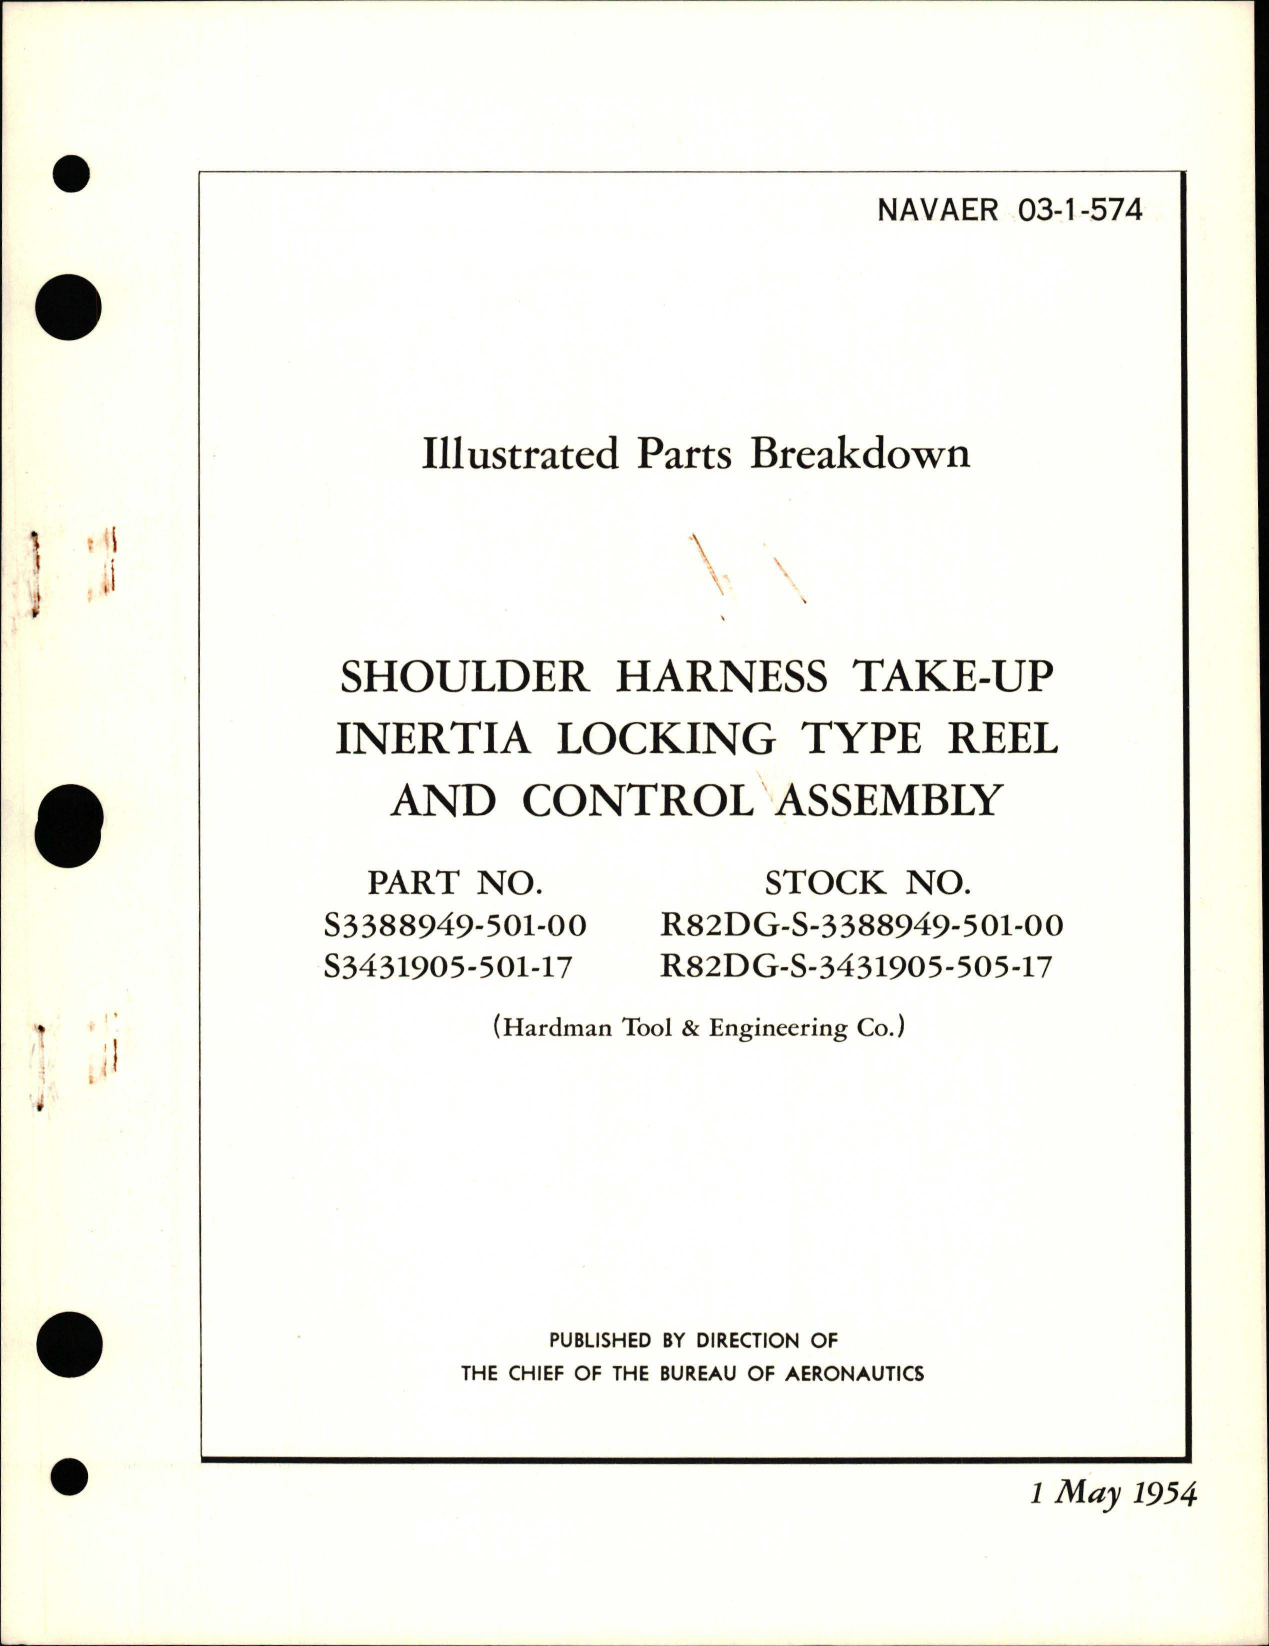 Sample page 1 from AirCorps Library document: Illustrated Parts for Shoulder Harness Take-Up Inertia Locking Type Reel and Control Assembly